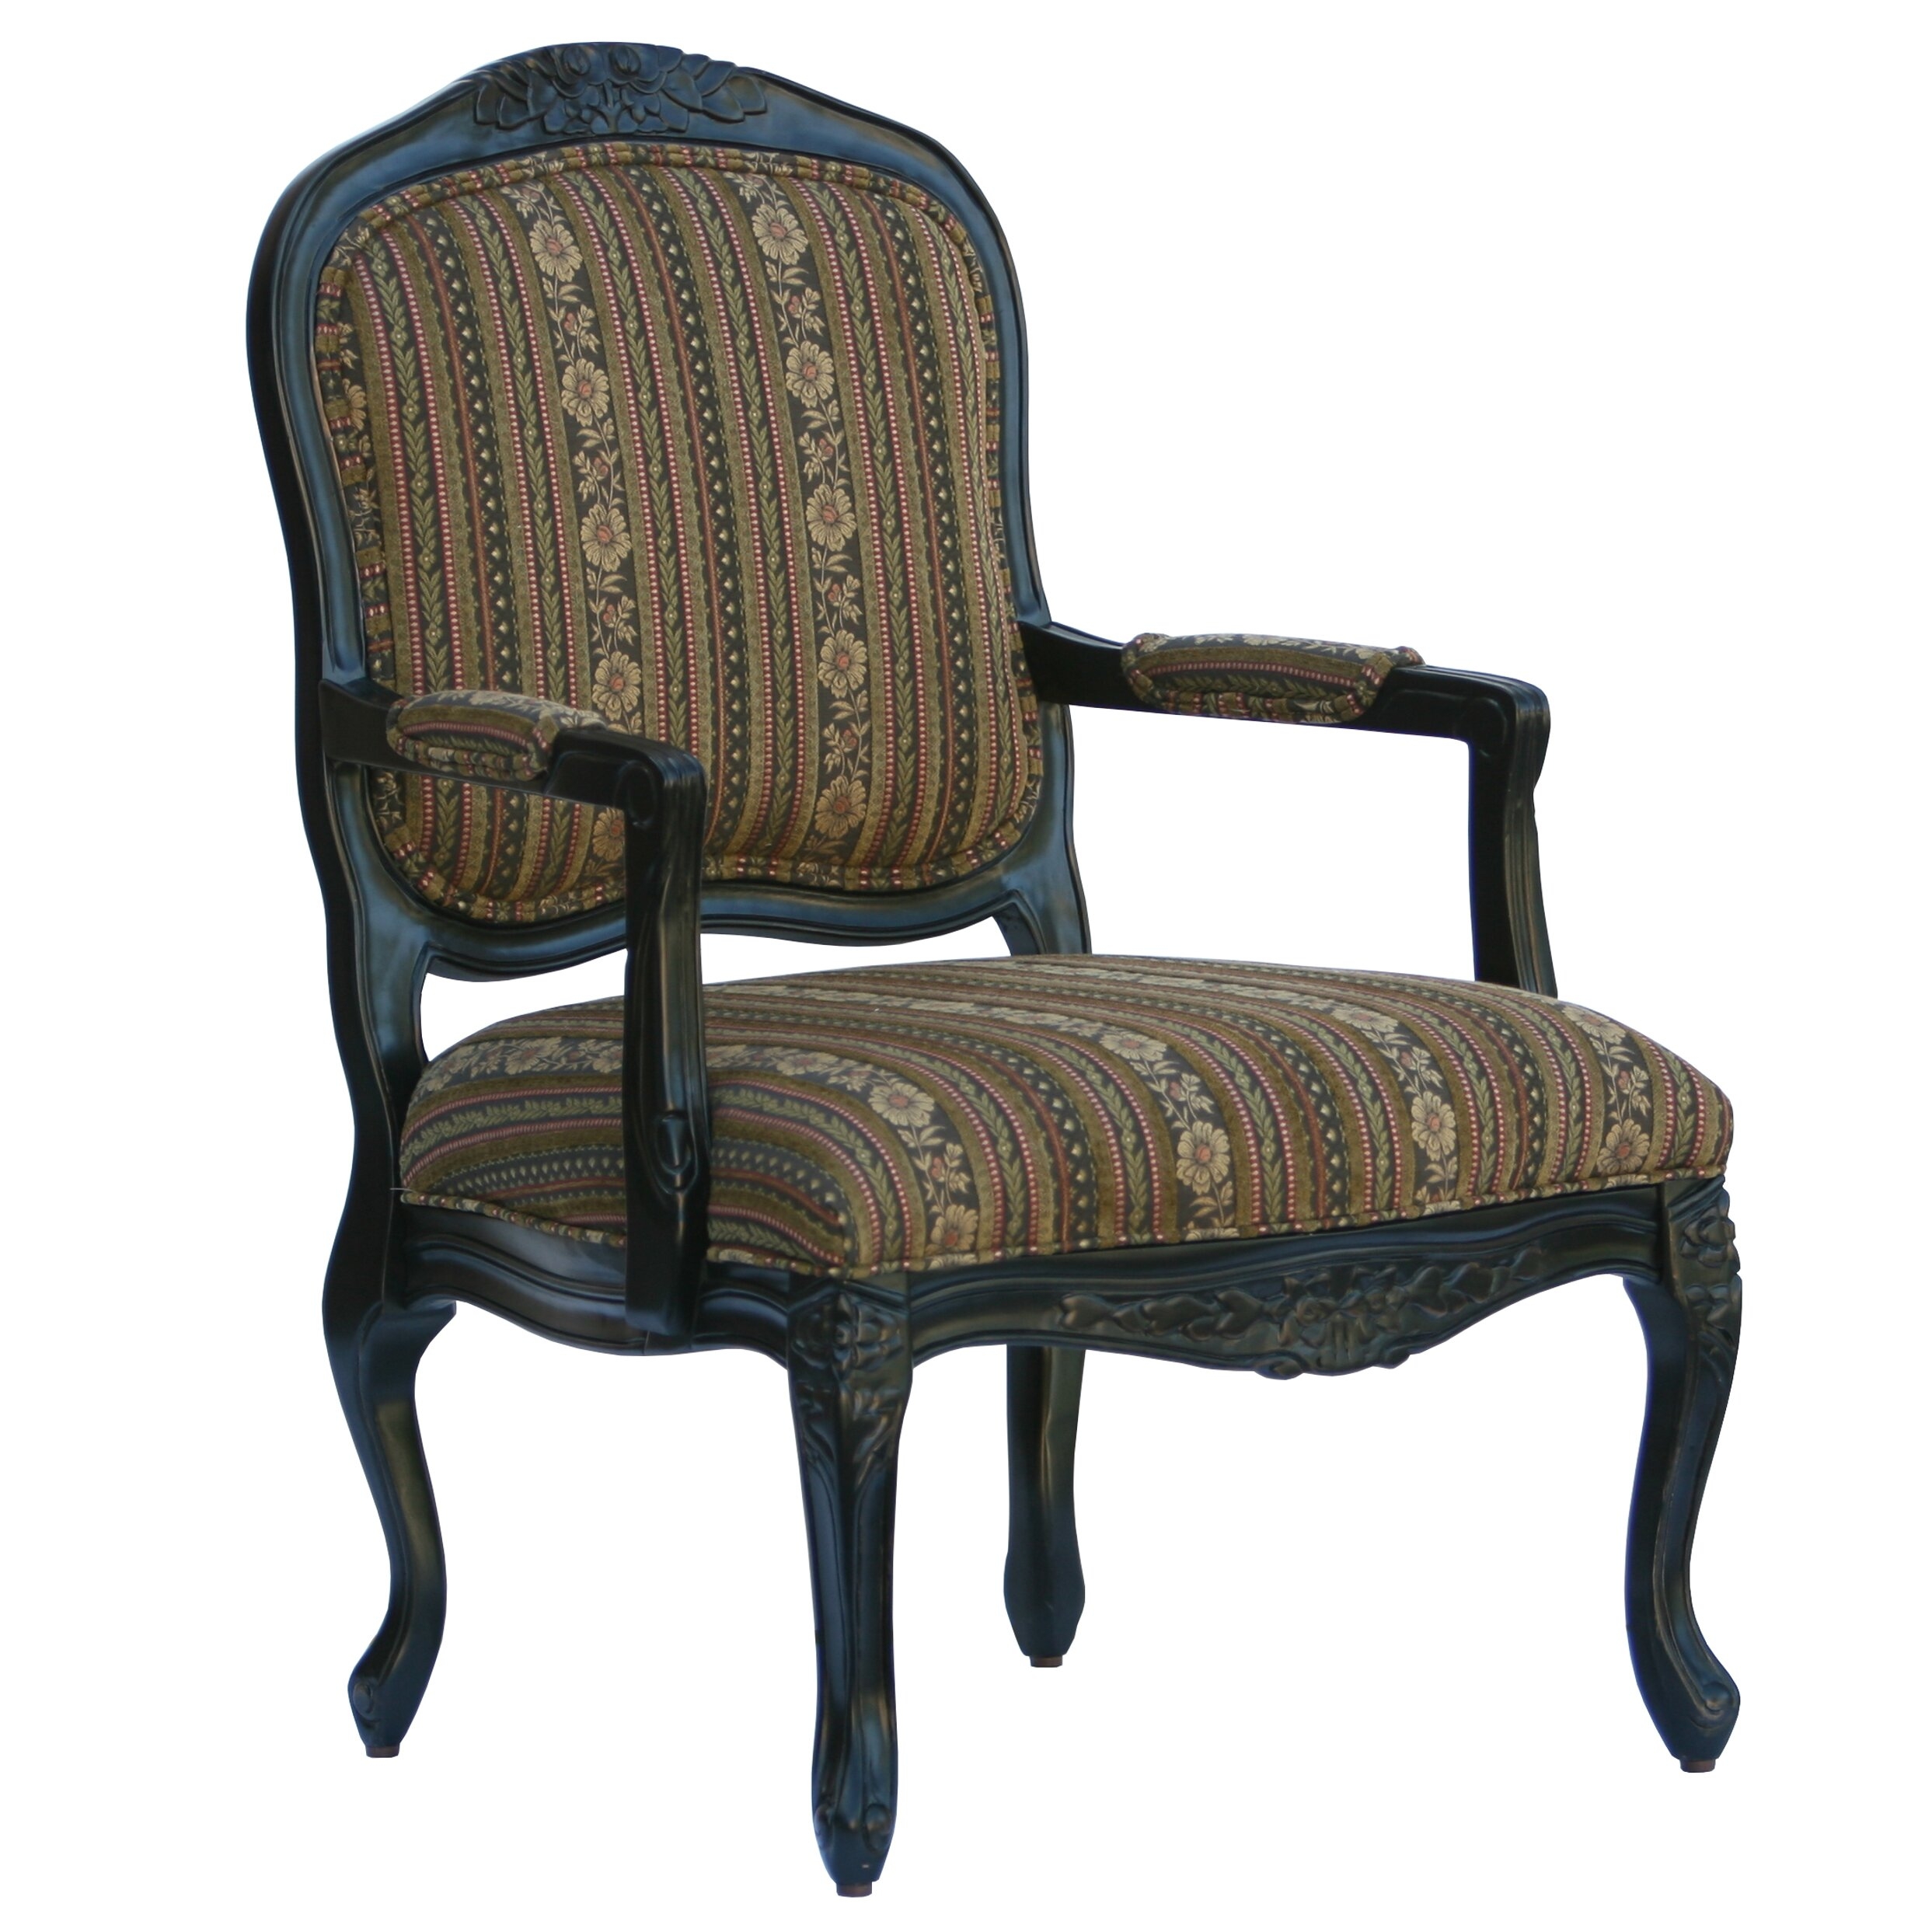 Comfort Pointe 143-02 Essex Provincial Styling Accent Chair,